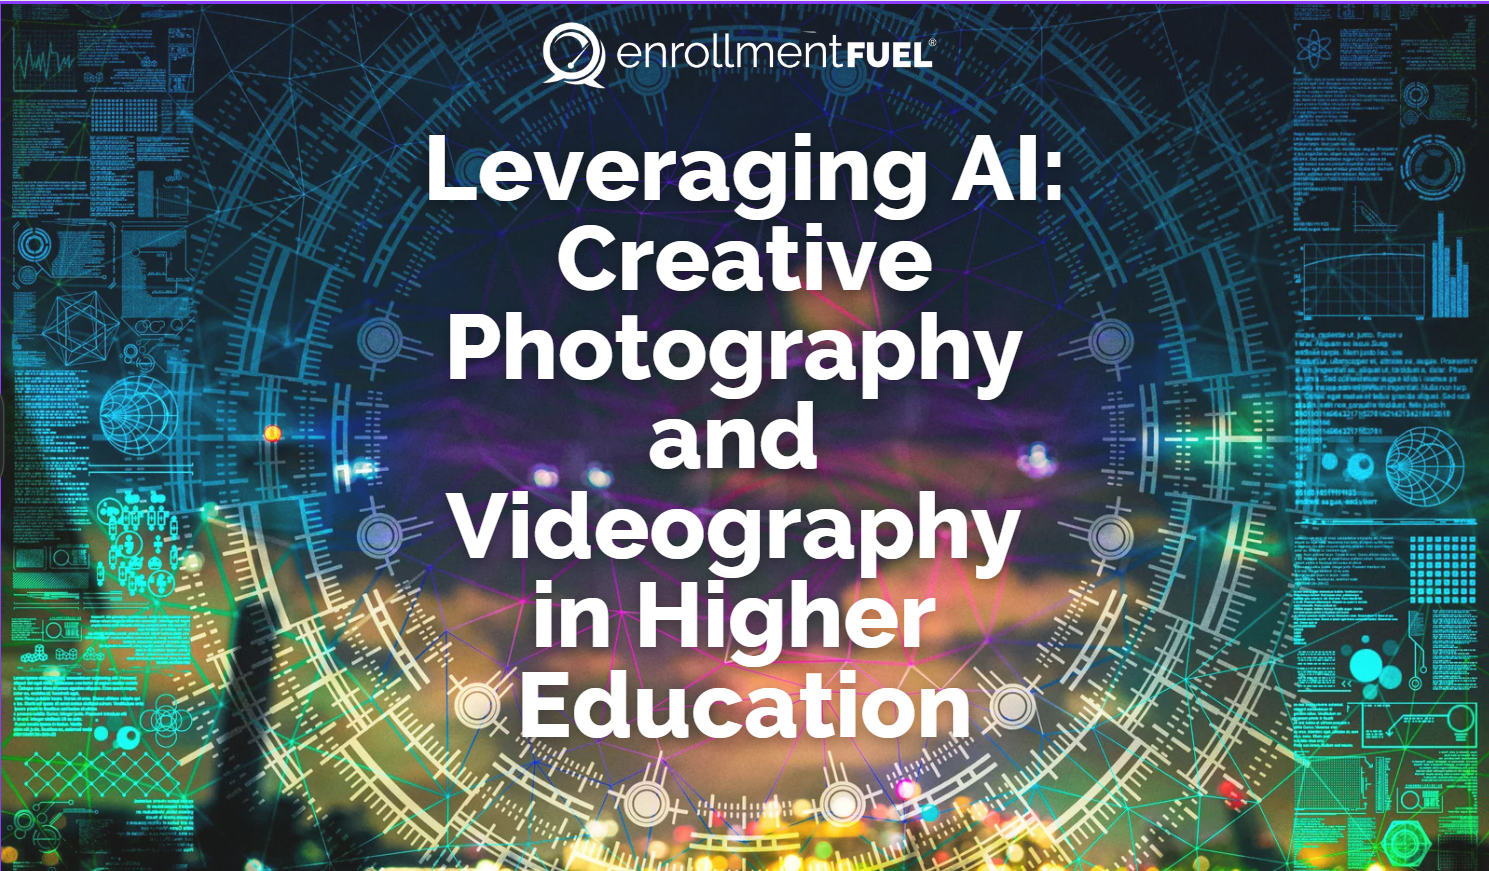 Leveraging AI: Creative Photography and Videography in Higher Education